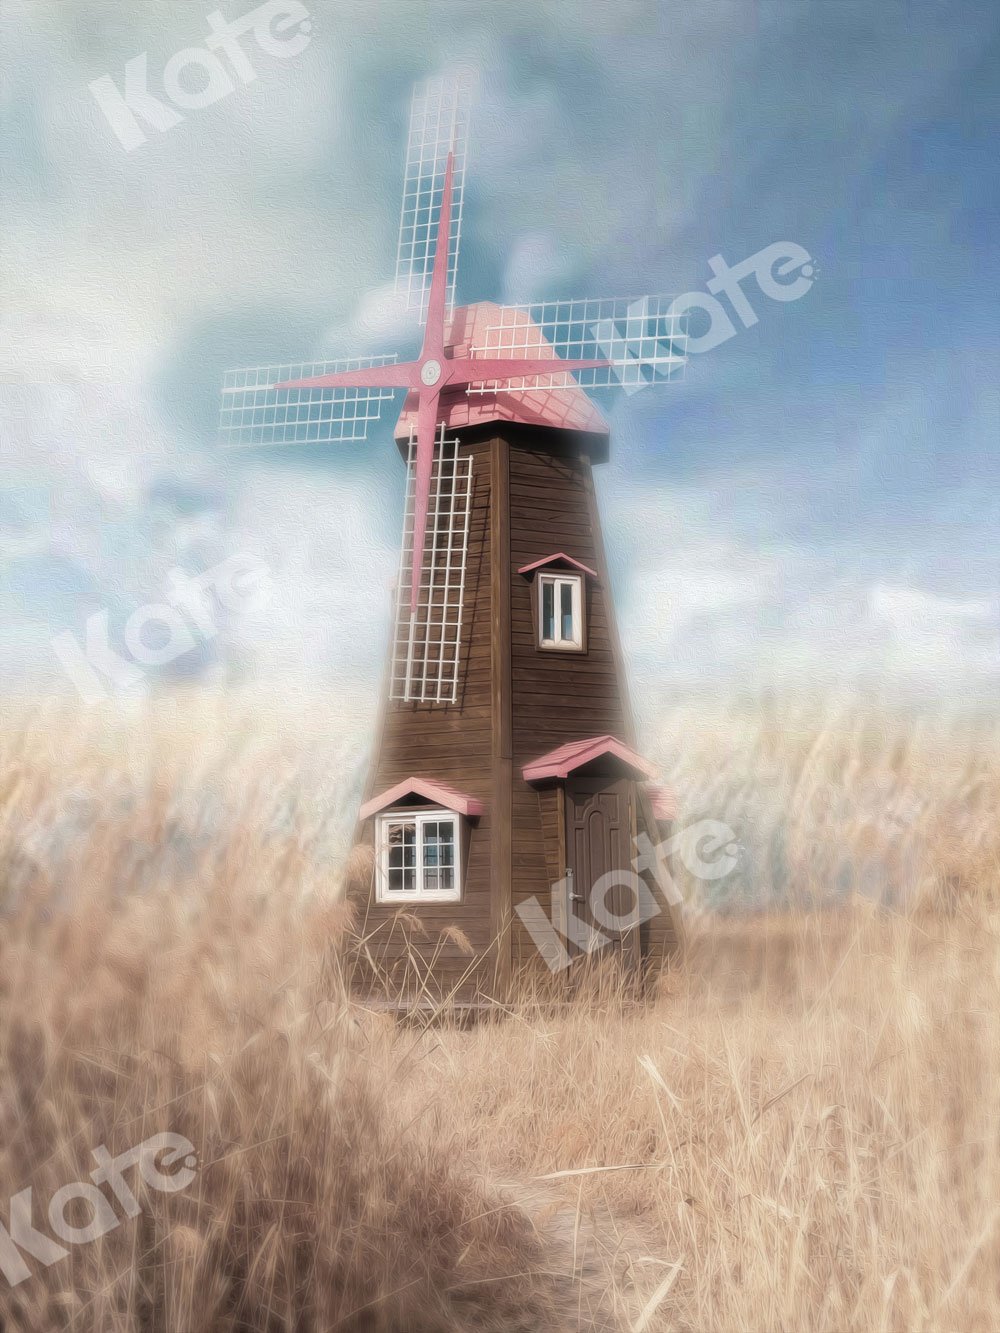 Kate Autumn Backdrop Wheatfield Pink Windmill for Photography